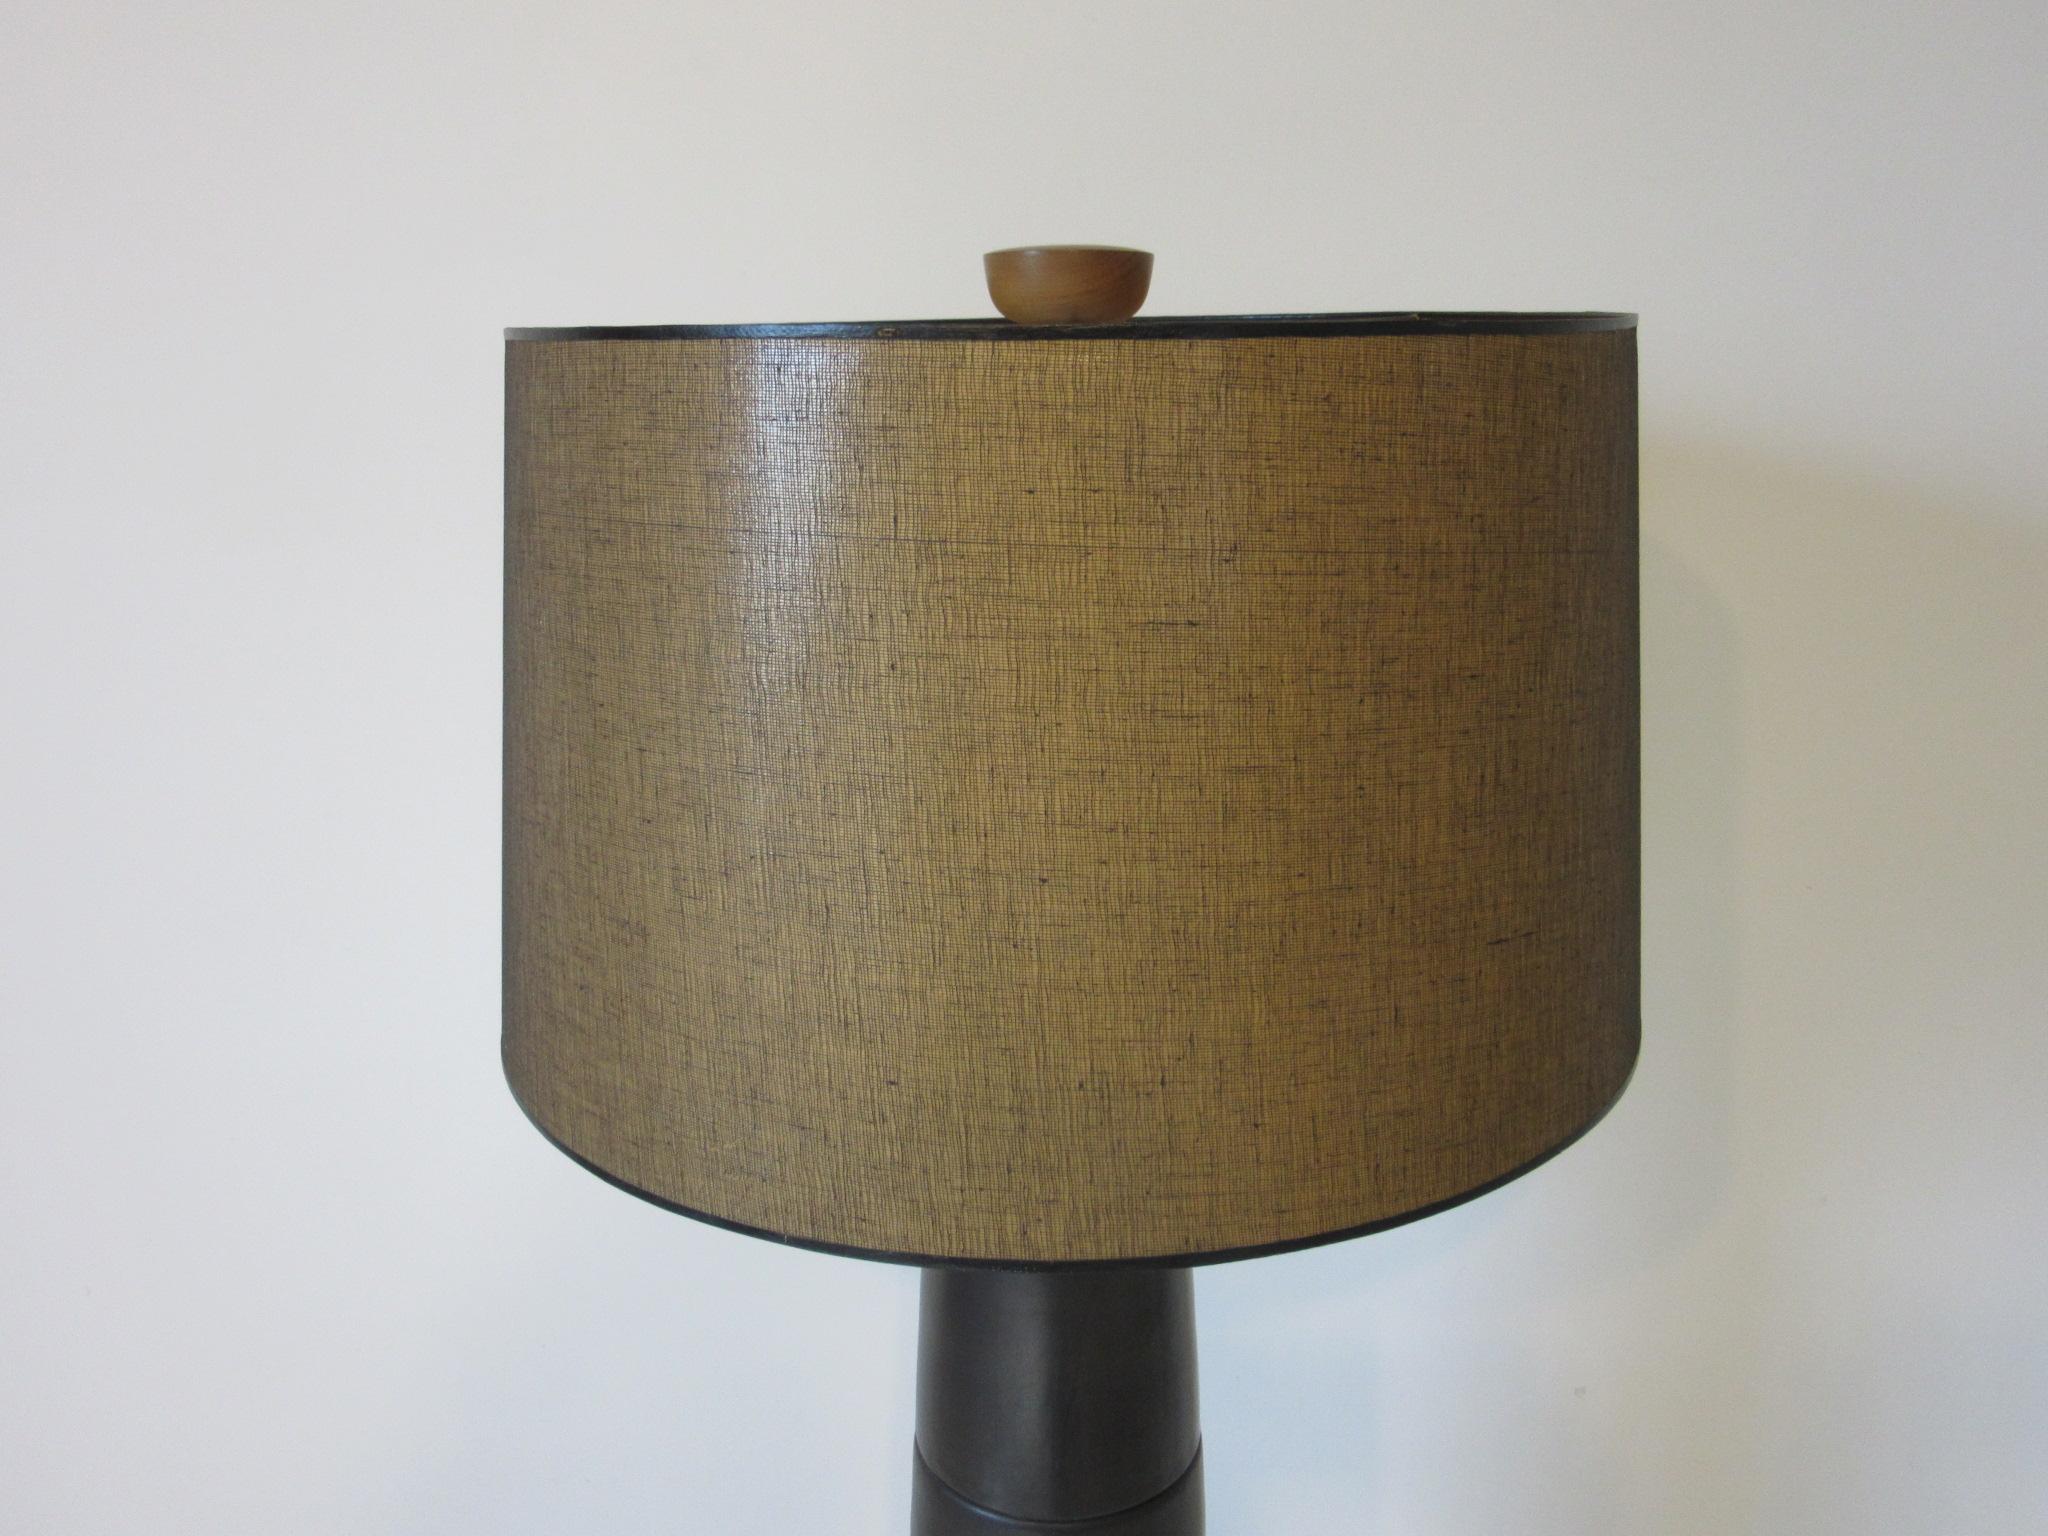 A large ebony / coffee bean toned midcentury pottery lamp with walnut upper shaft and the original walnut finial. Retains the original shade, paper manufactures label and incised signature by Martz for Marshall Studios, this is the Classic lamp for